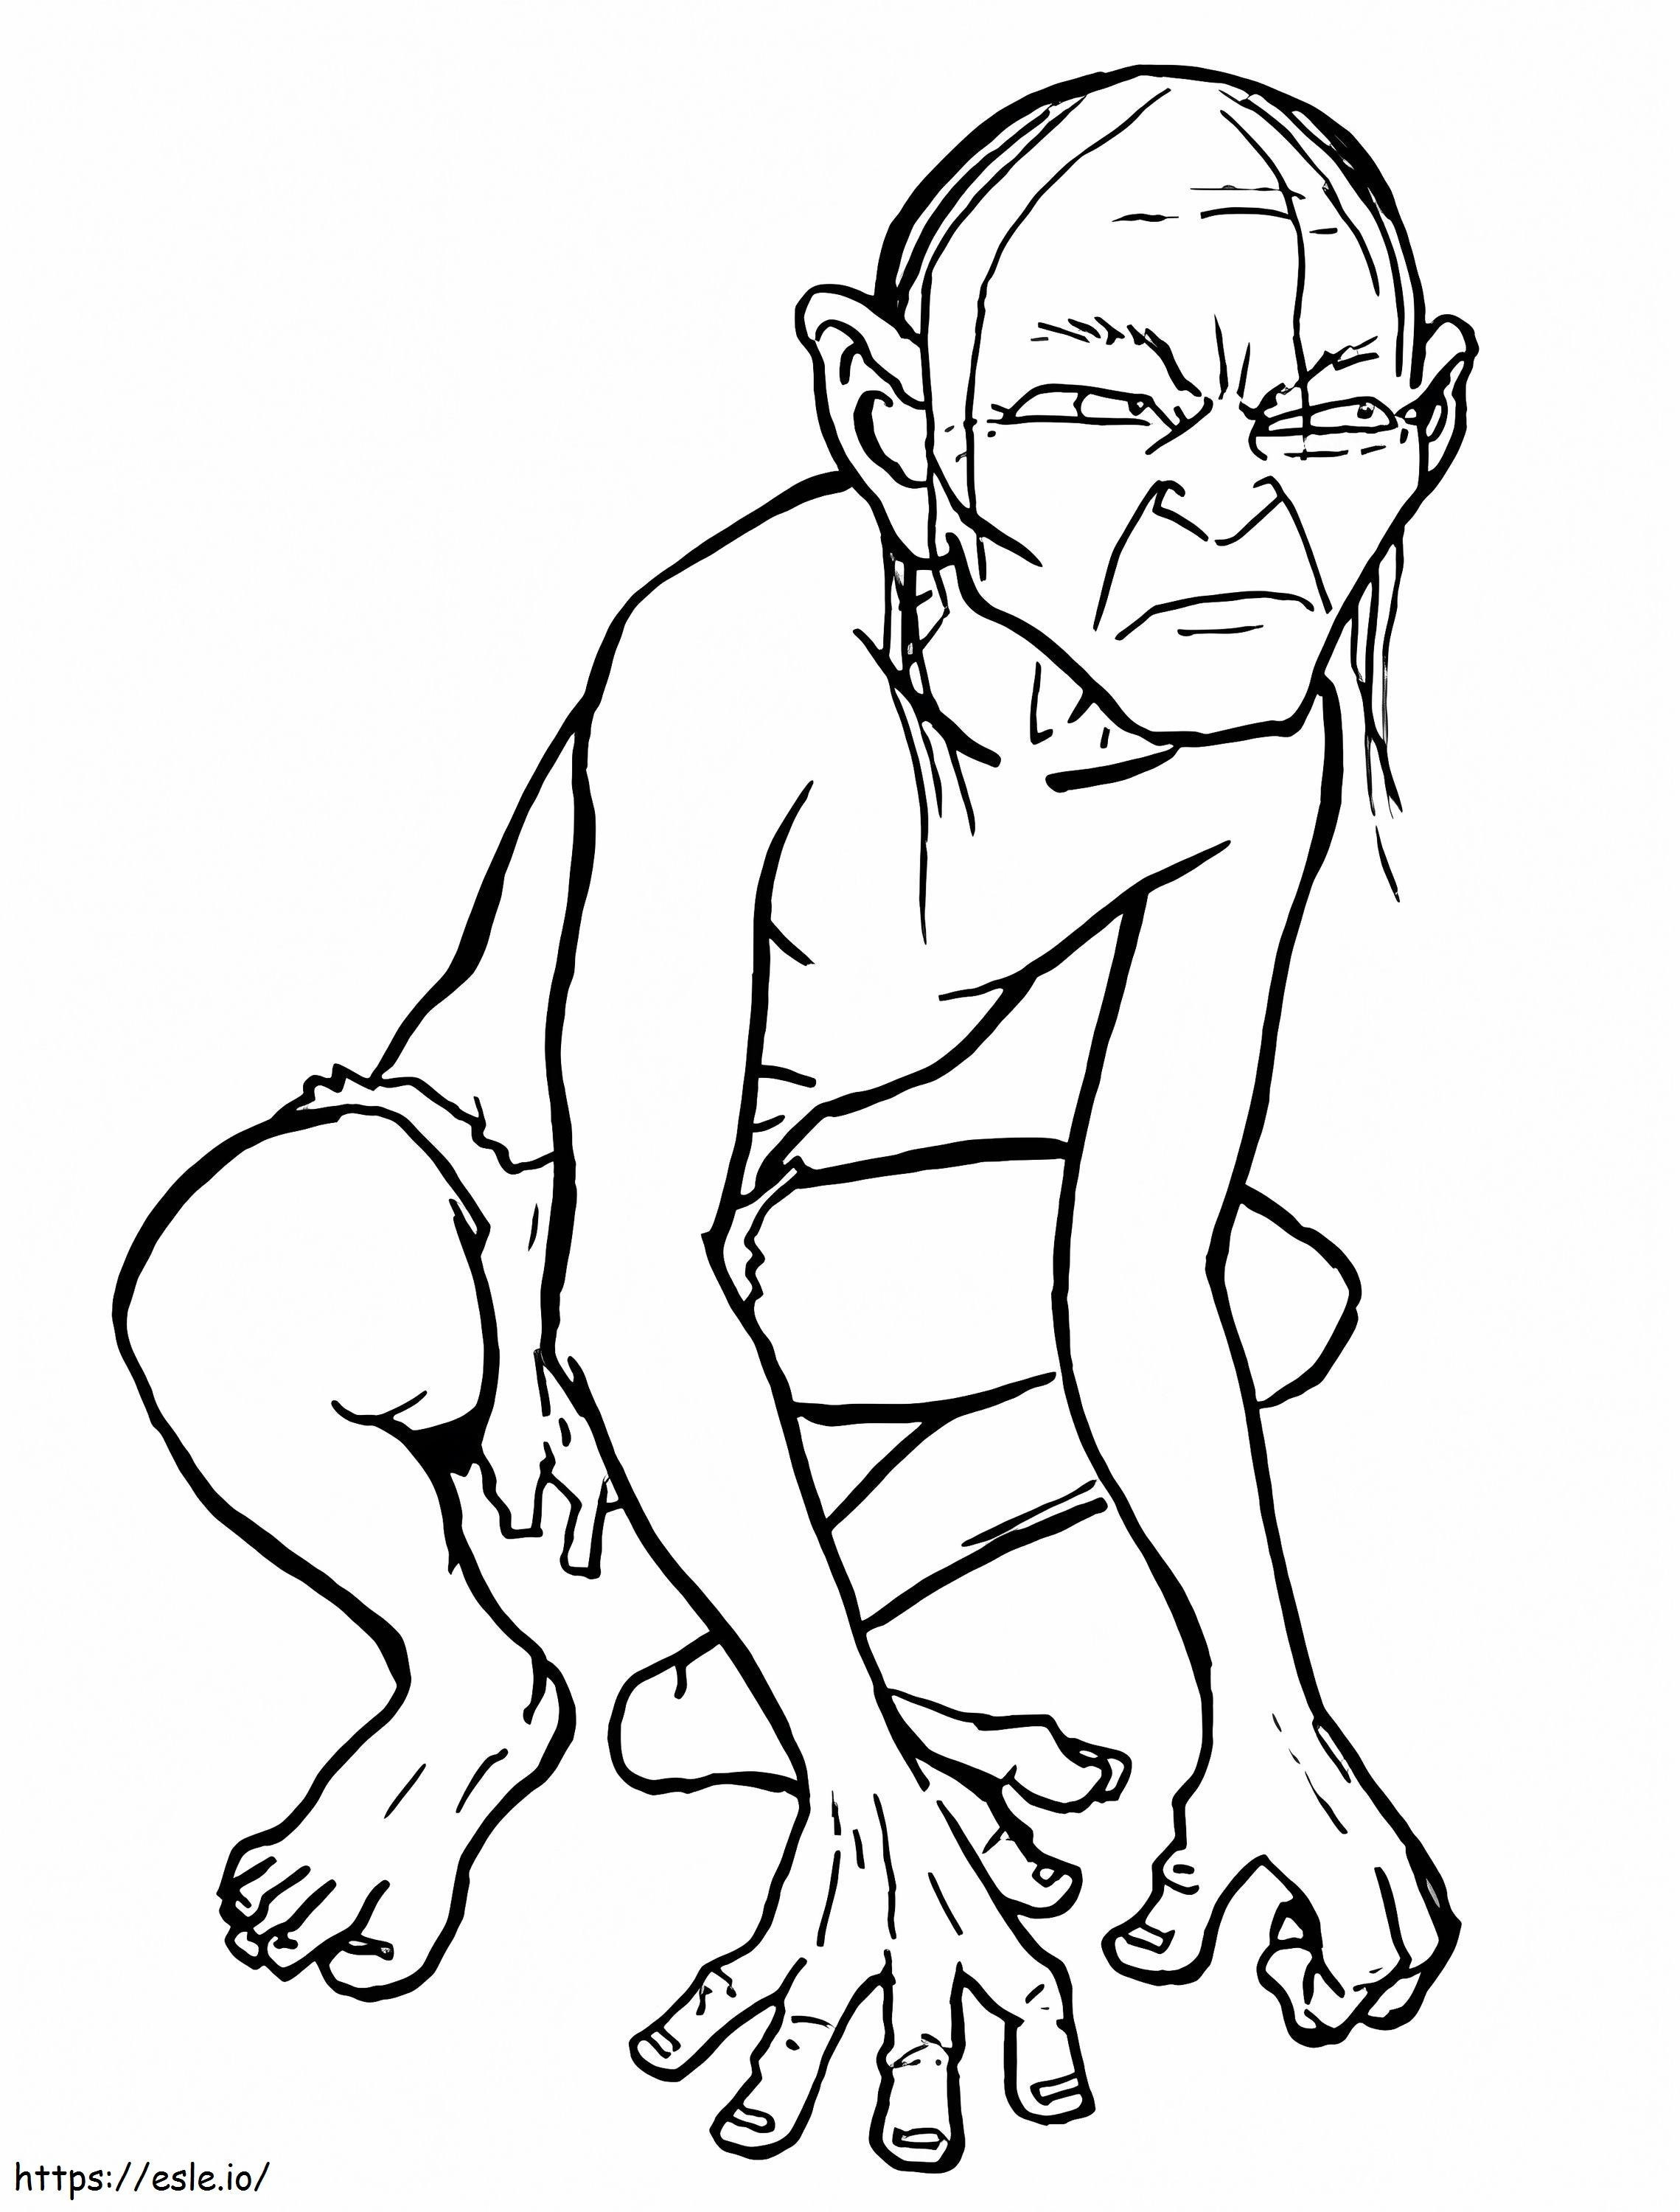 Gollum Is Angry coloring page